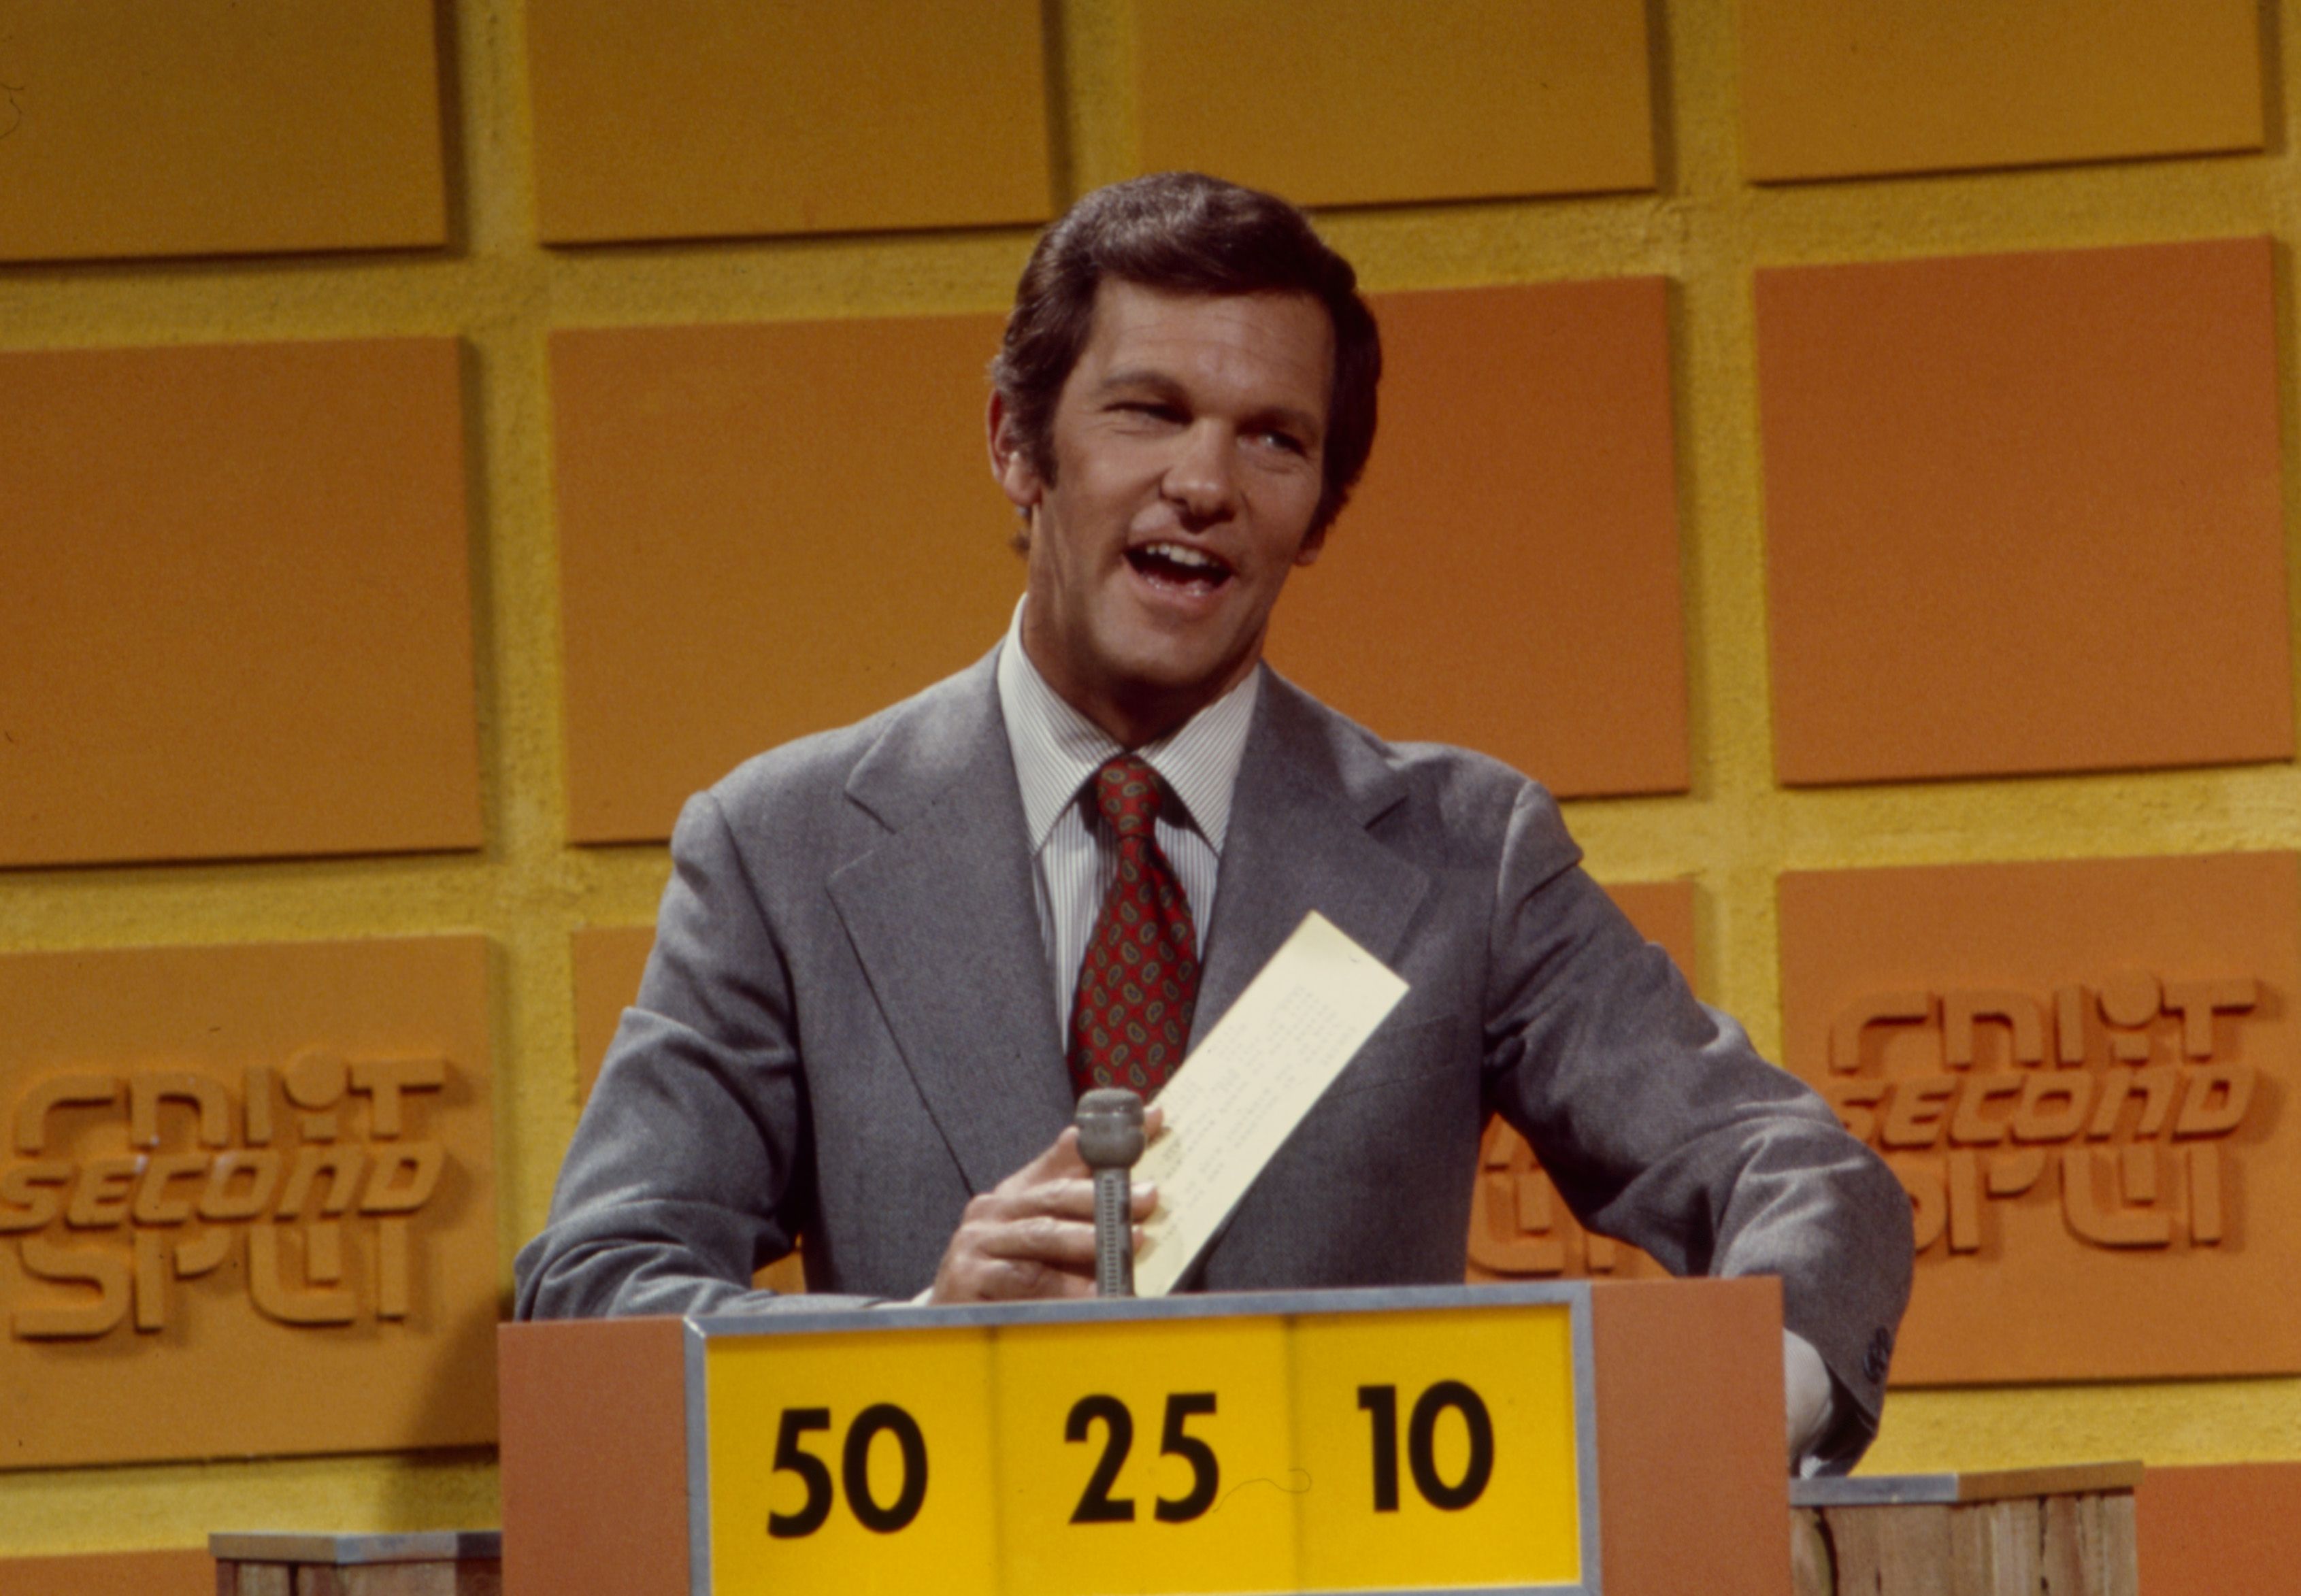 70s game show hosts